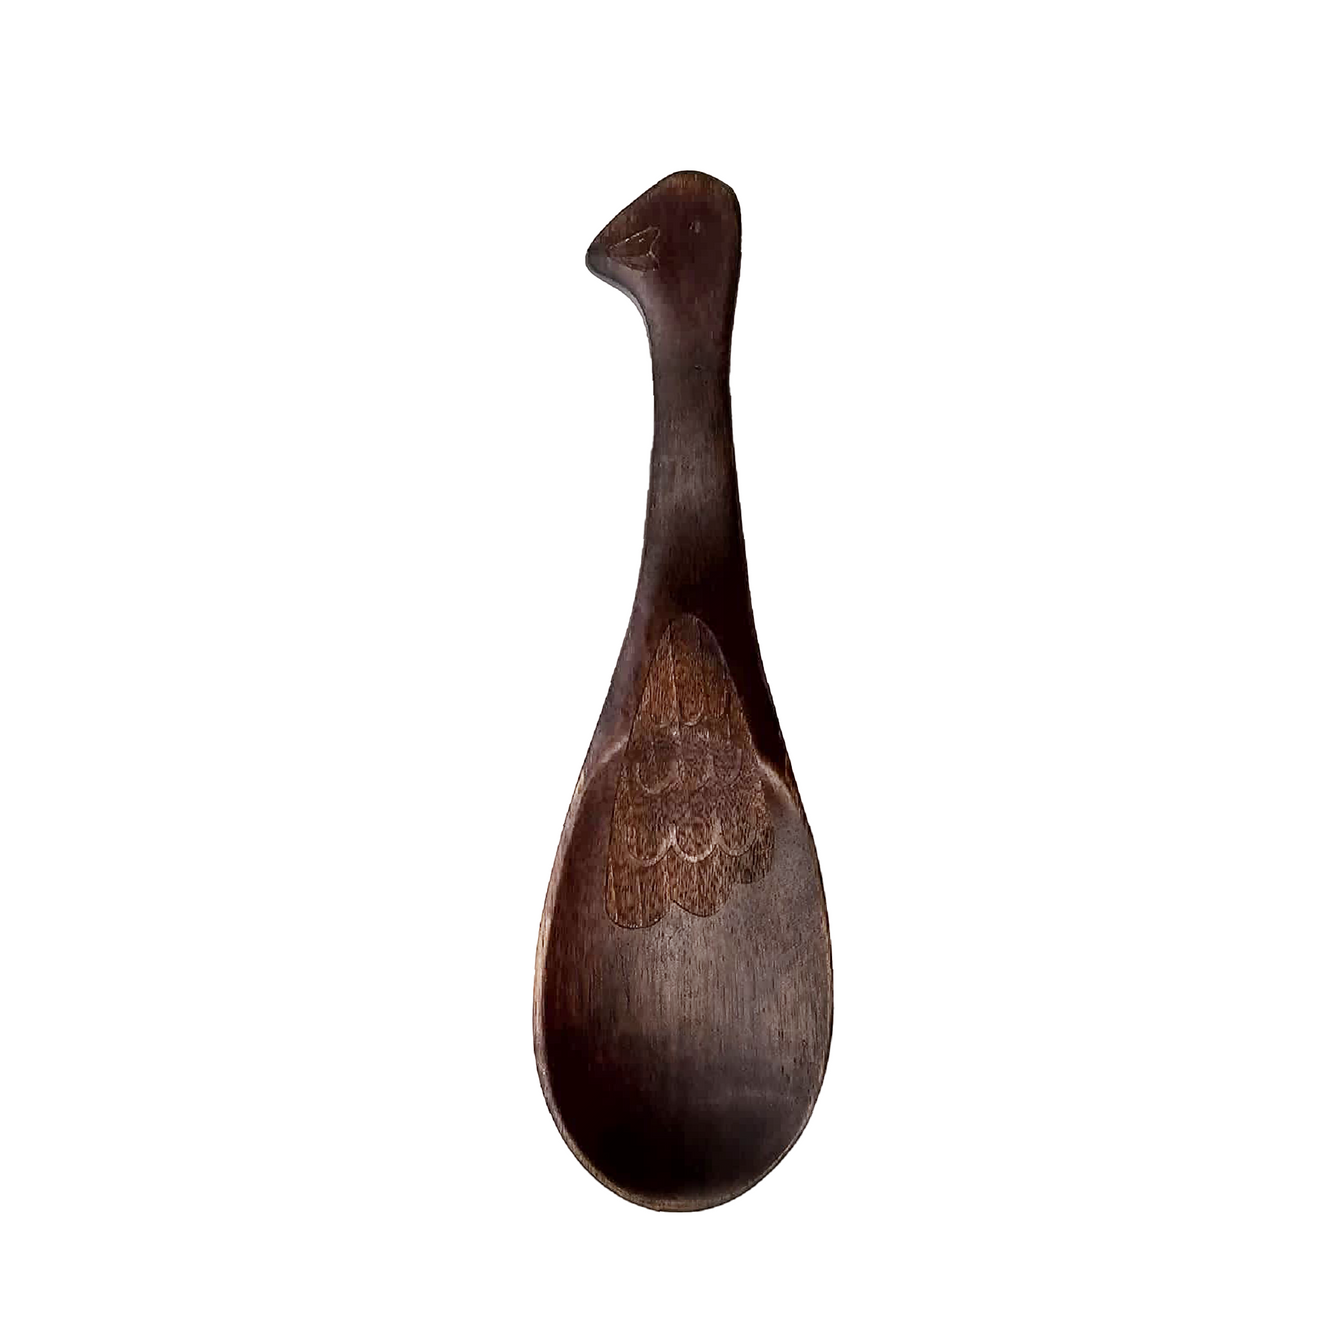 Wooden Rice Paddle